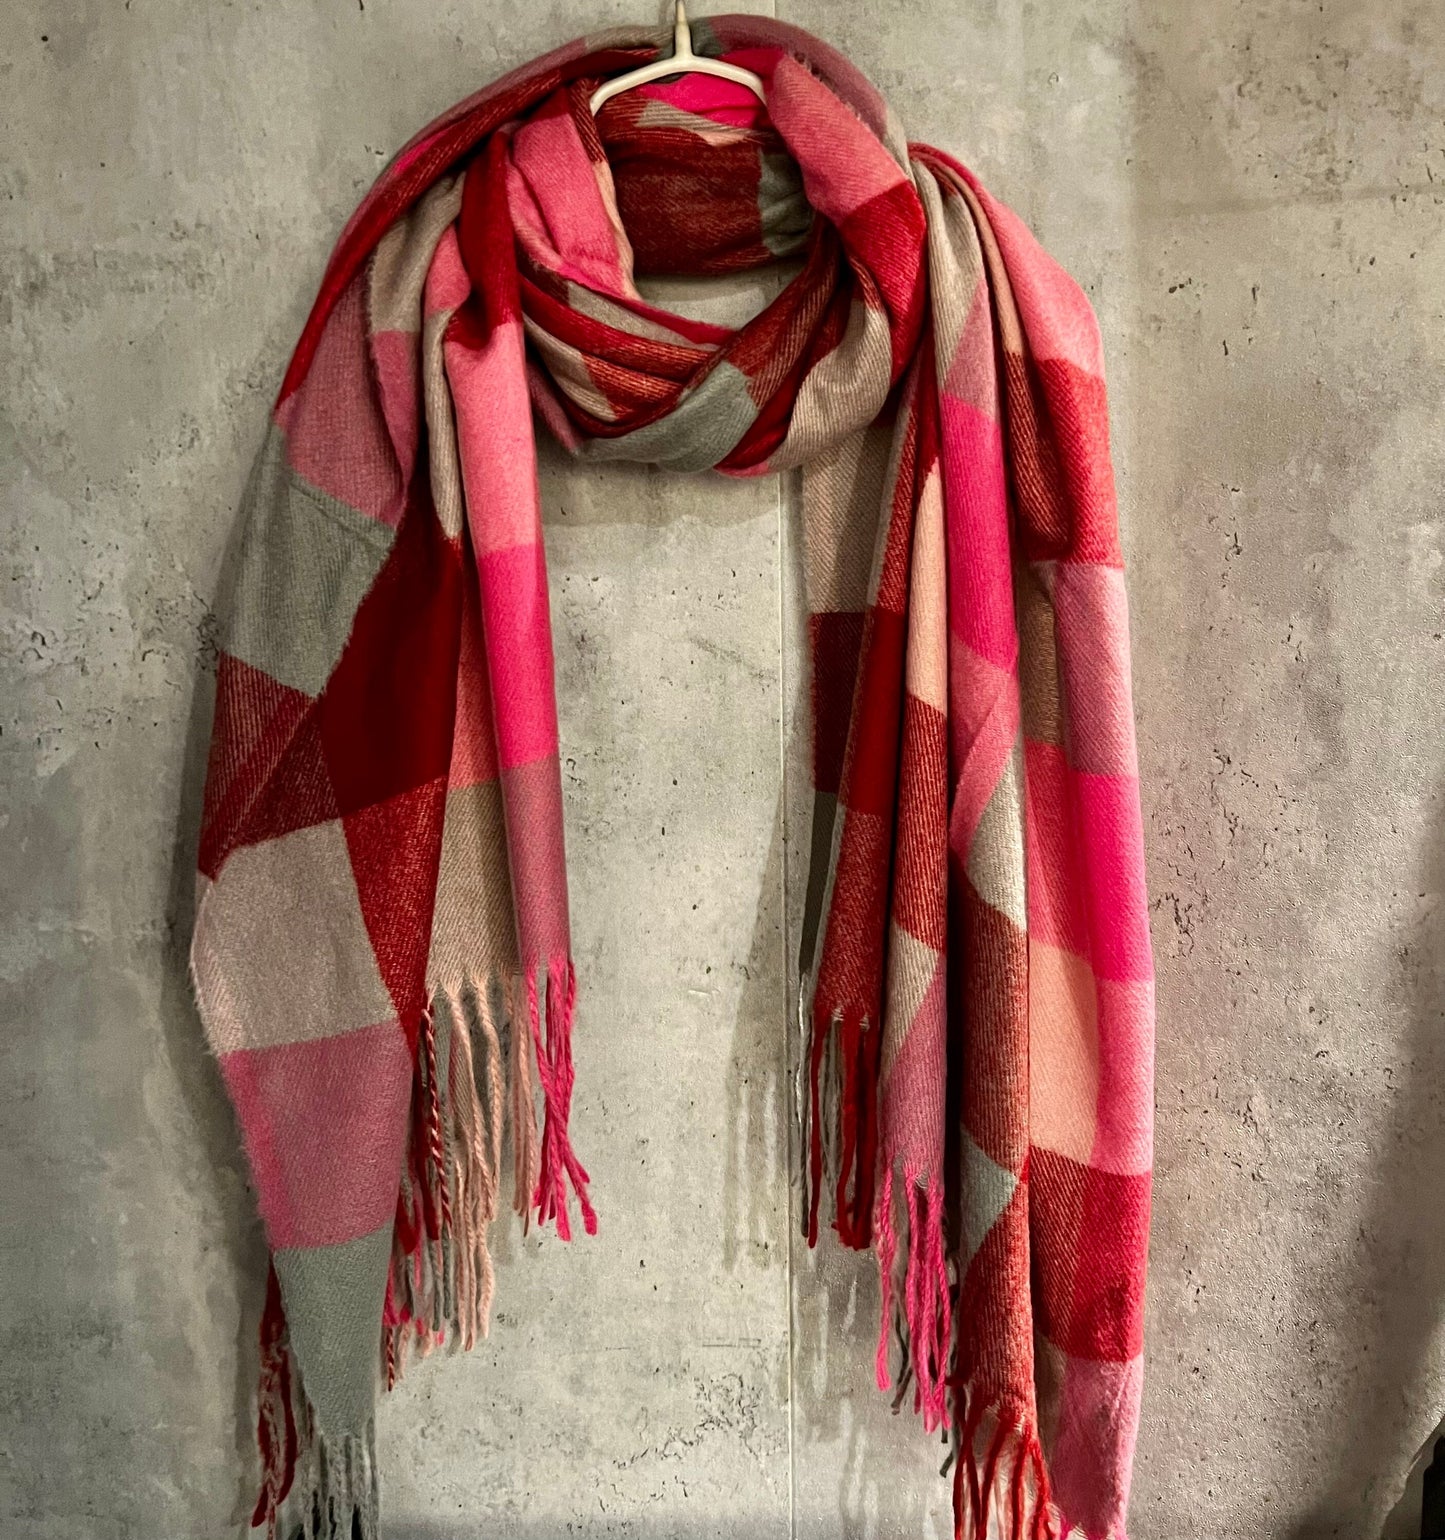 Checked Pattern Pink Red Beige Cashmere Blend Scarf/Winter Autumn Scarf/Gifts For Mum/Gifts For Her/Scarf Women/Christmas Birthday Gifts